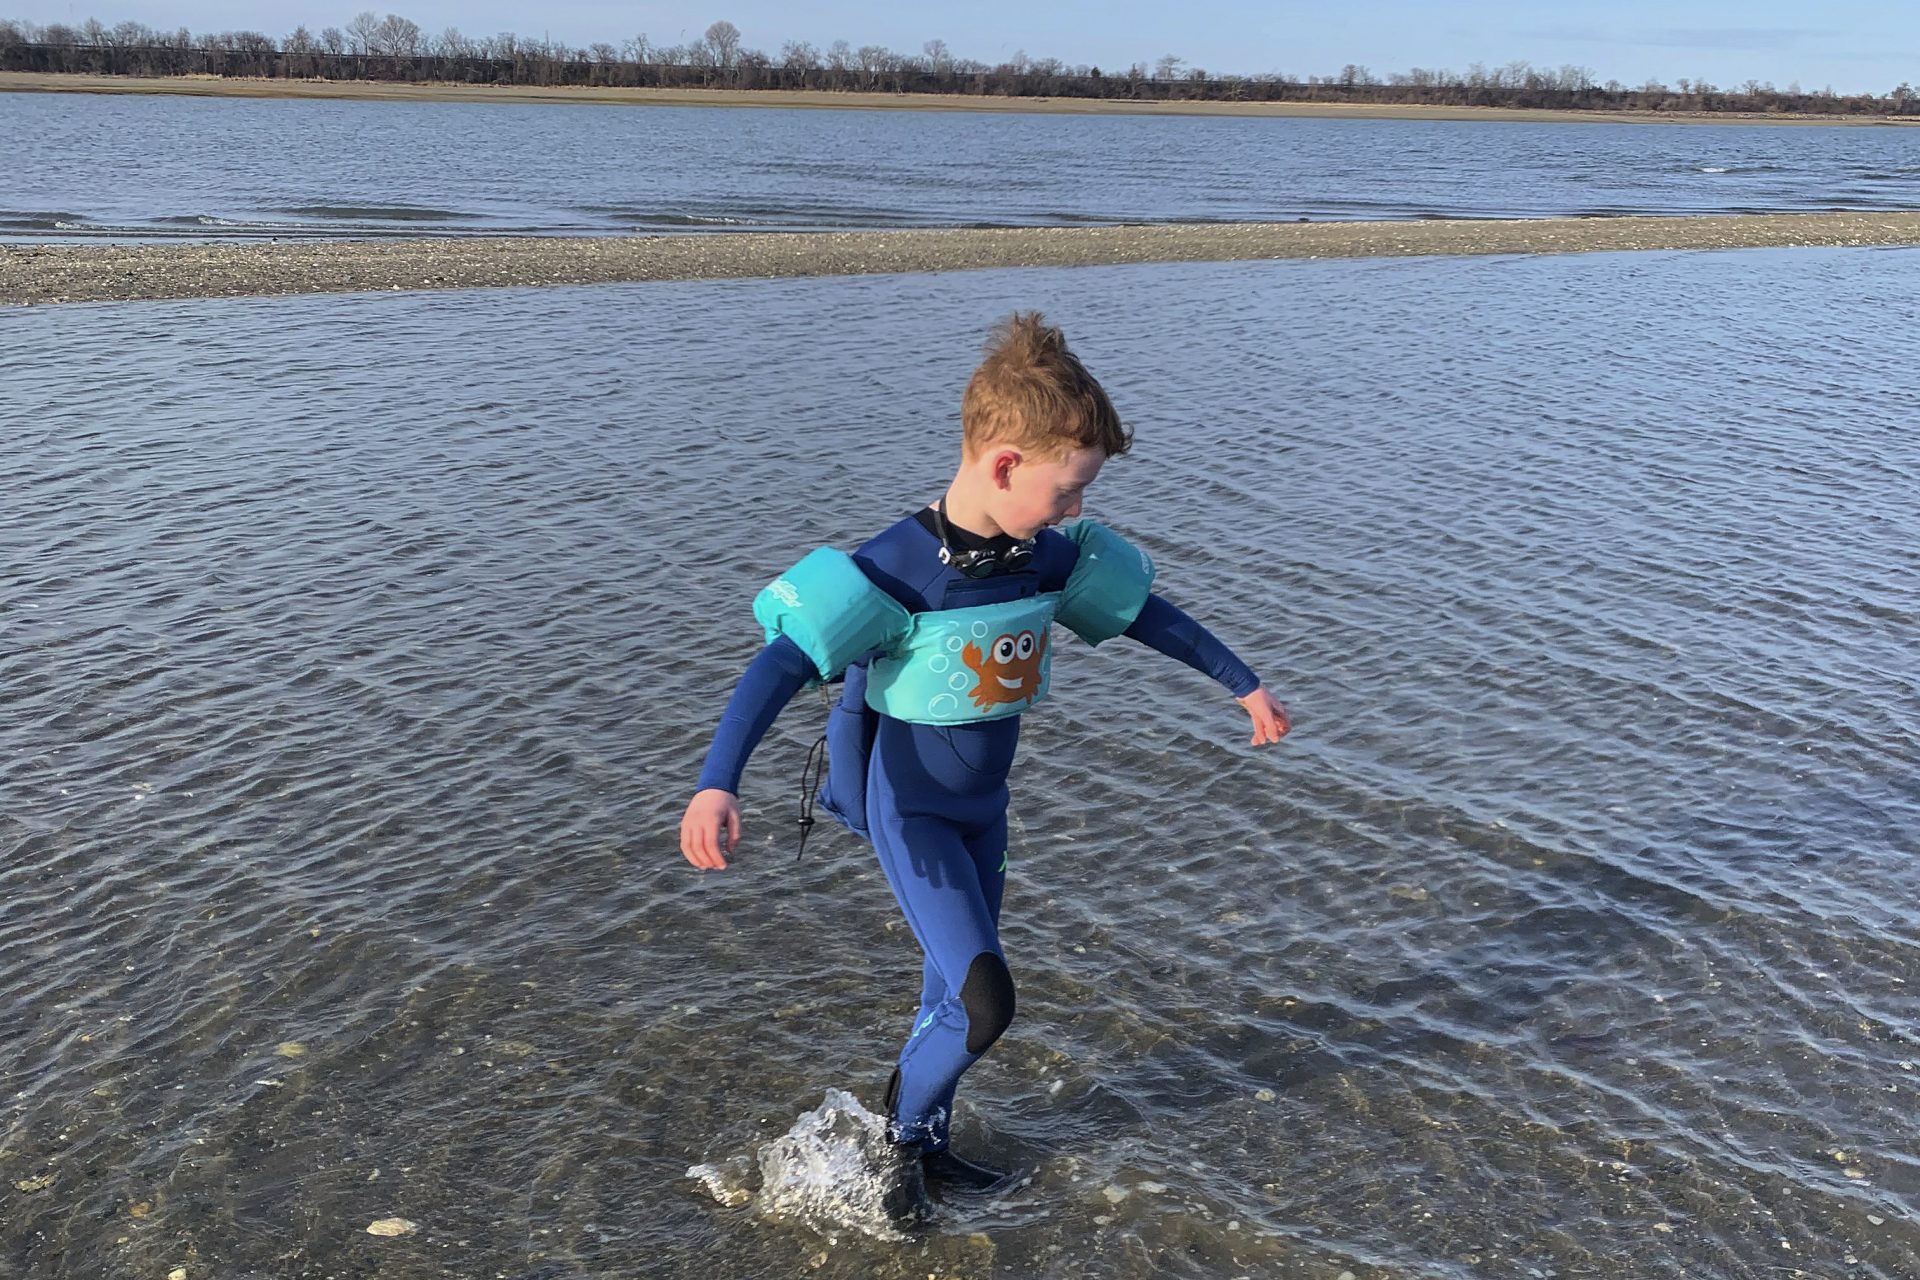 This March 18, 2020, photo released by Alexandra Nicholson shows her son, Henry Martinsen, playing at a beach in Quincy, Mass. The frustration of parents is mounting as more families across the U.S. enter their second or even third week of total distance learning, and some say it will be their last.